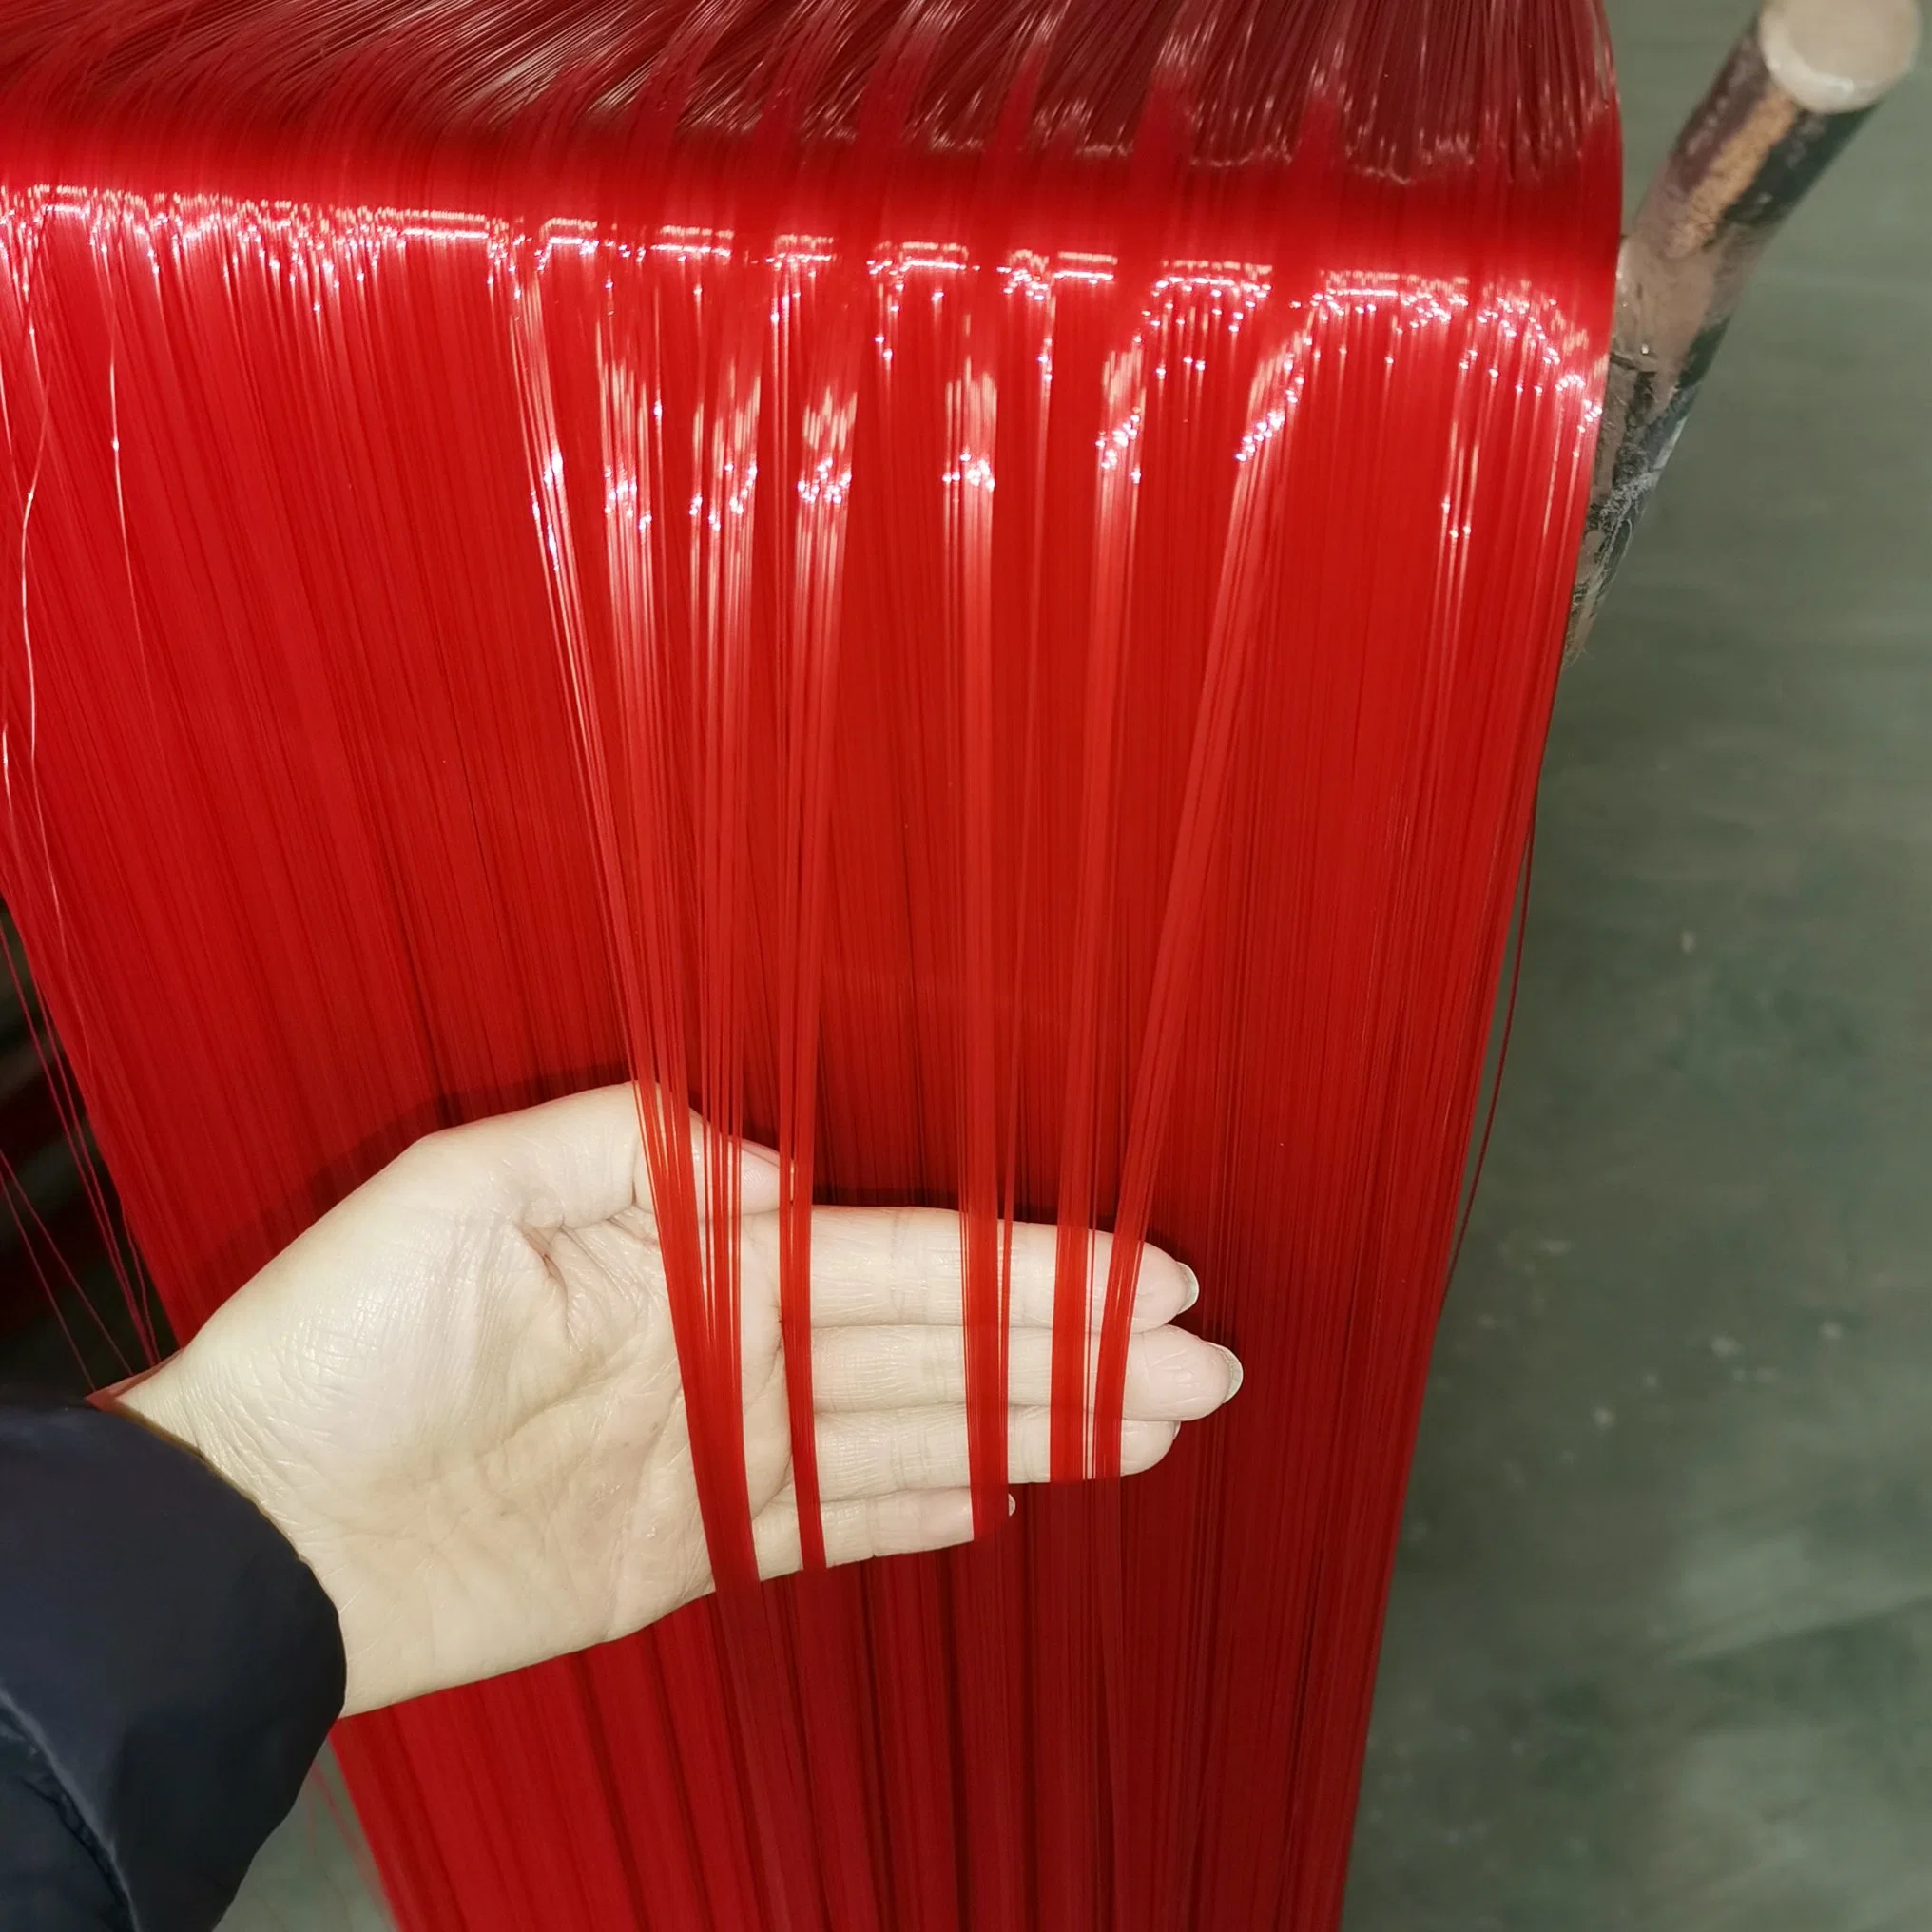 Popular Recycled Plastic Pet Broom Brush Filament Bristle Monofilament Extruder Making Machine with New Technology